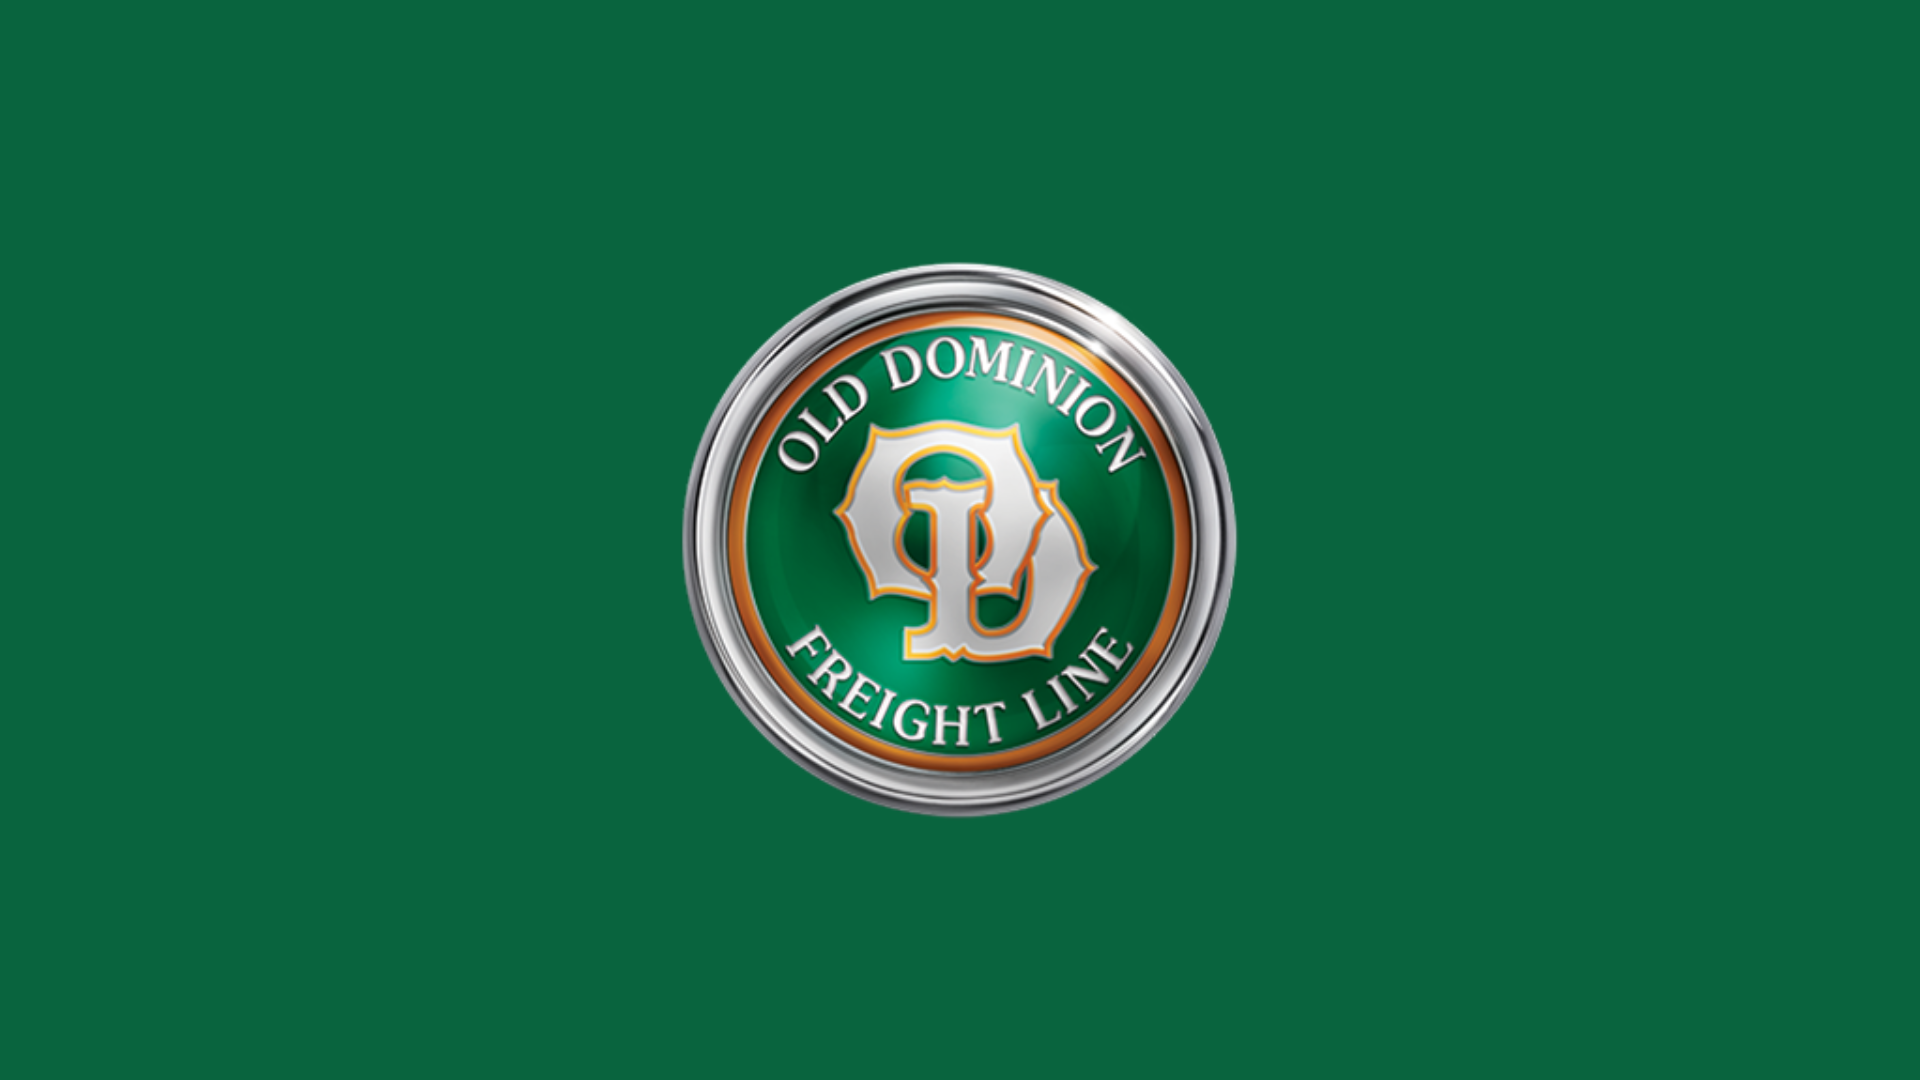 Old Freight Dominion Line logo